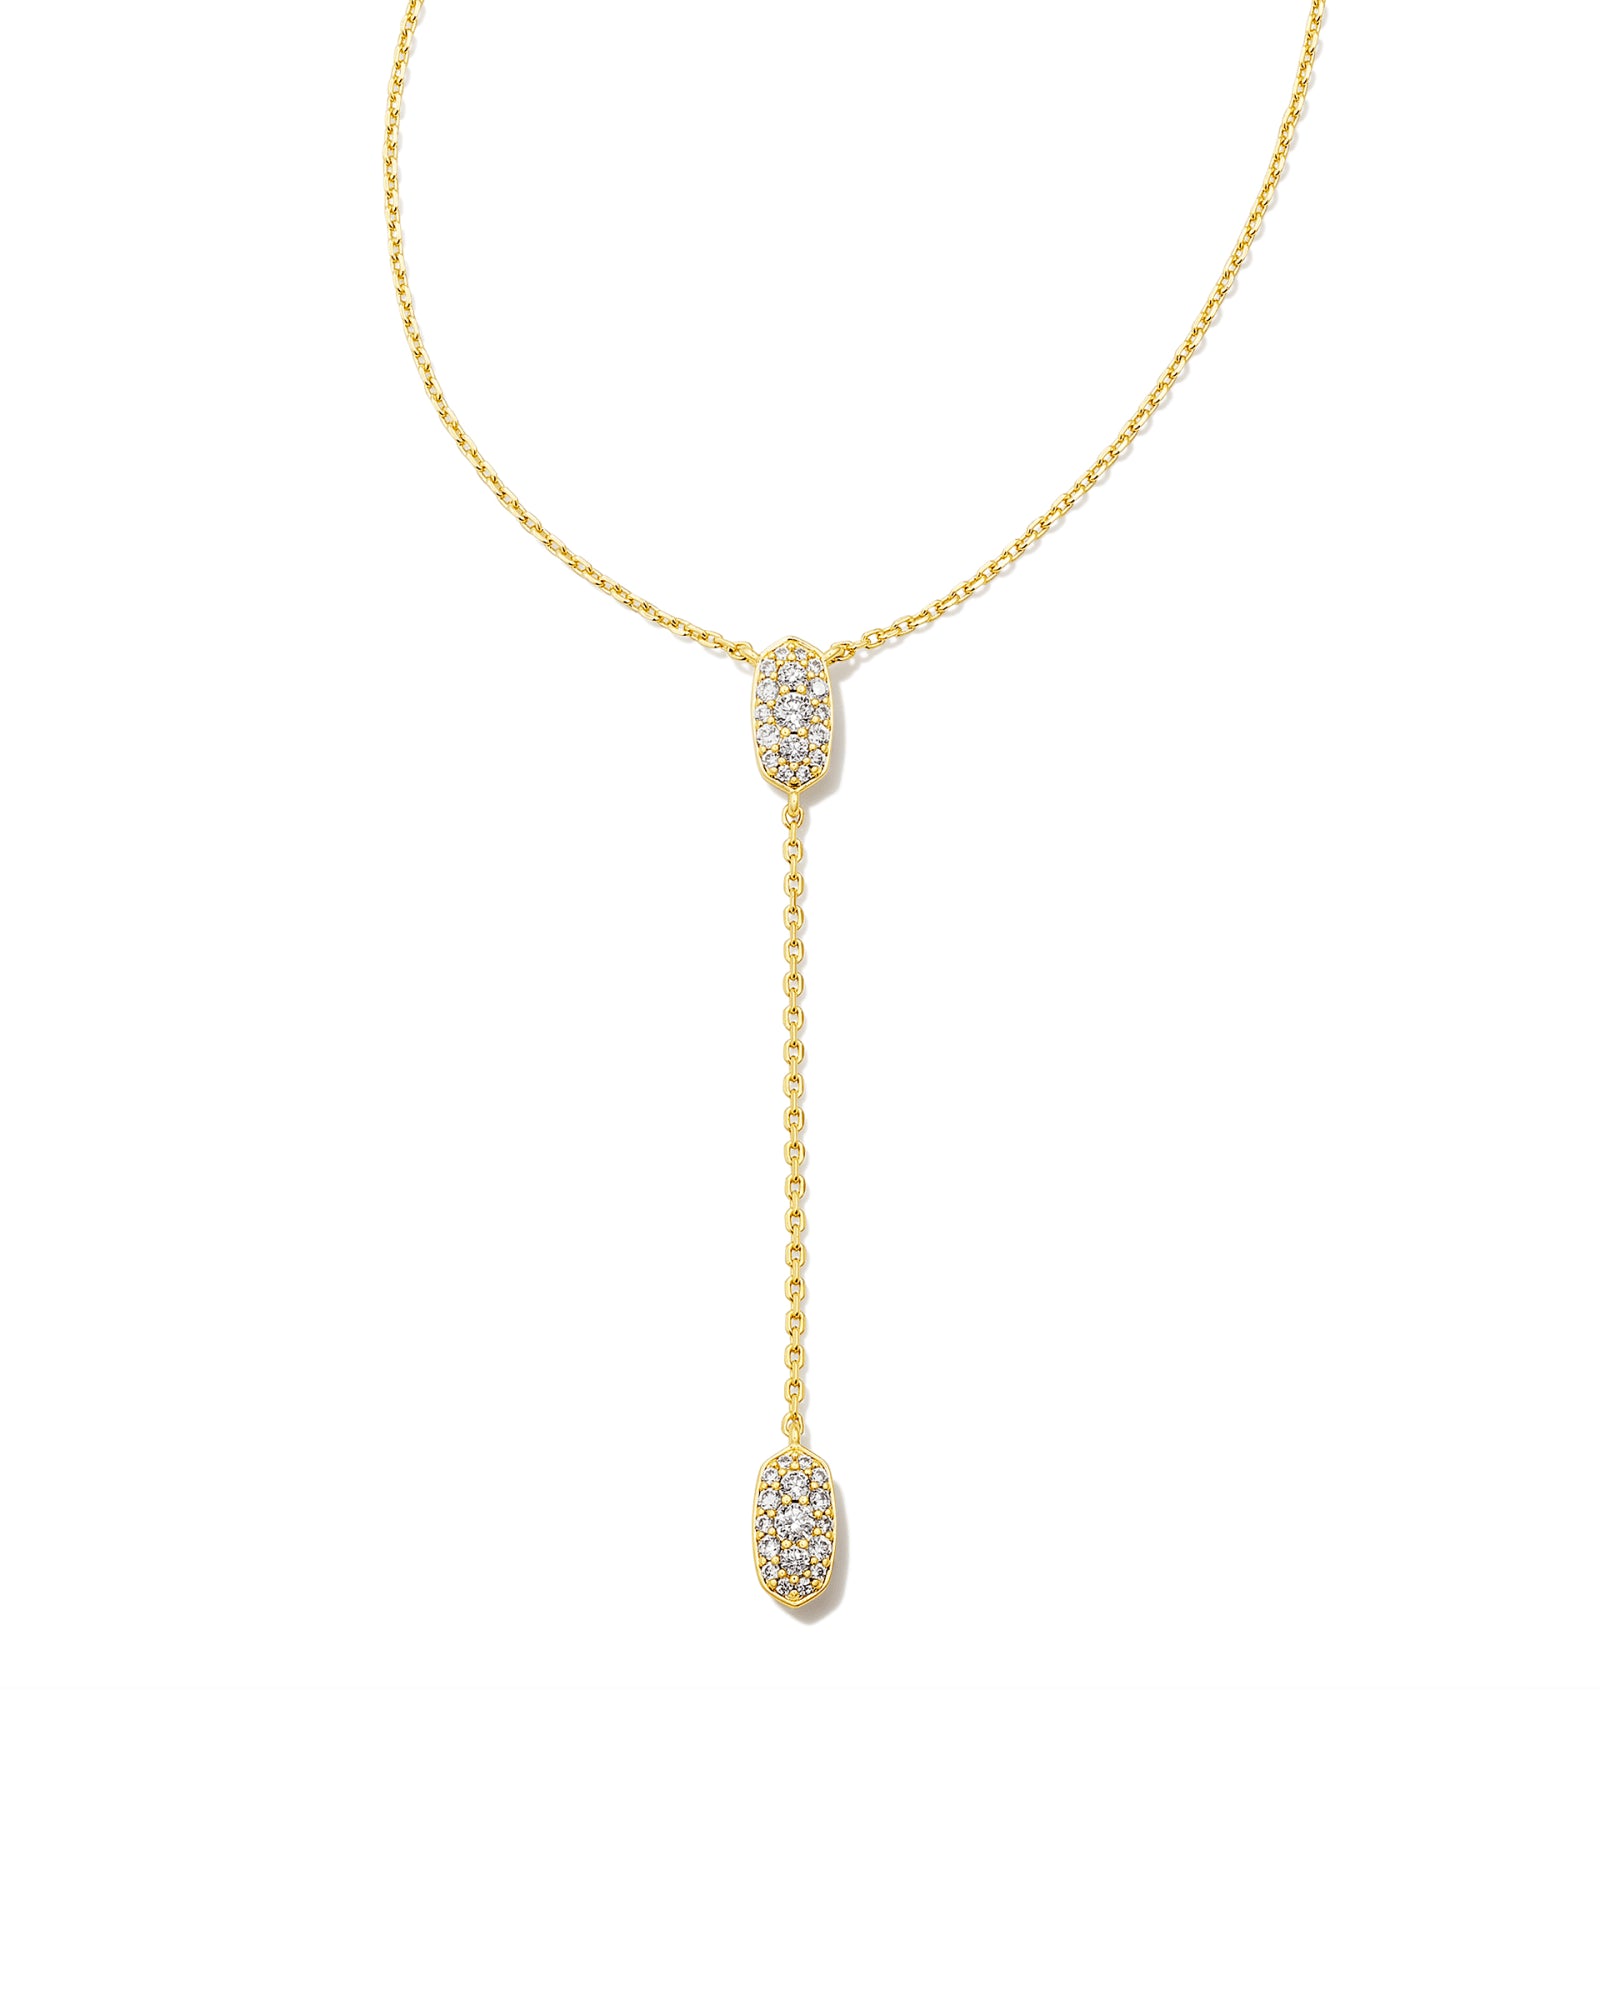 KENDRA SCOTT- Grayson Gold Y Necklace in White Crystal